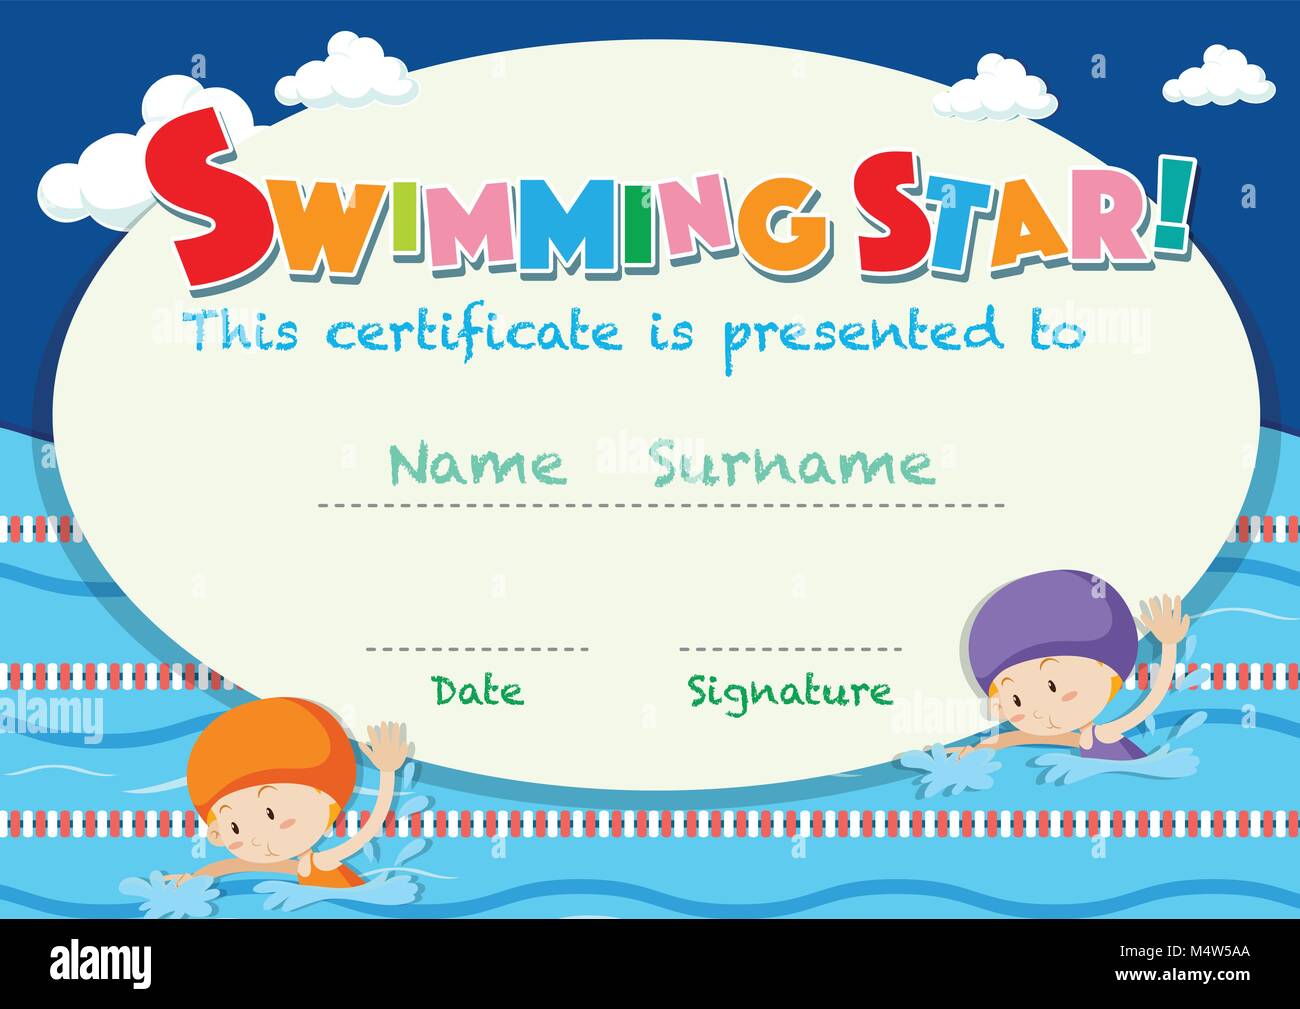 swimming-certificate-stock-vector-images-alamy